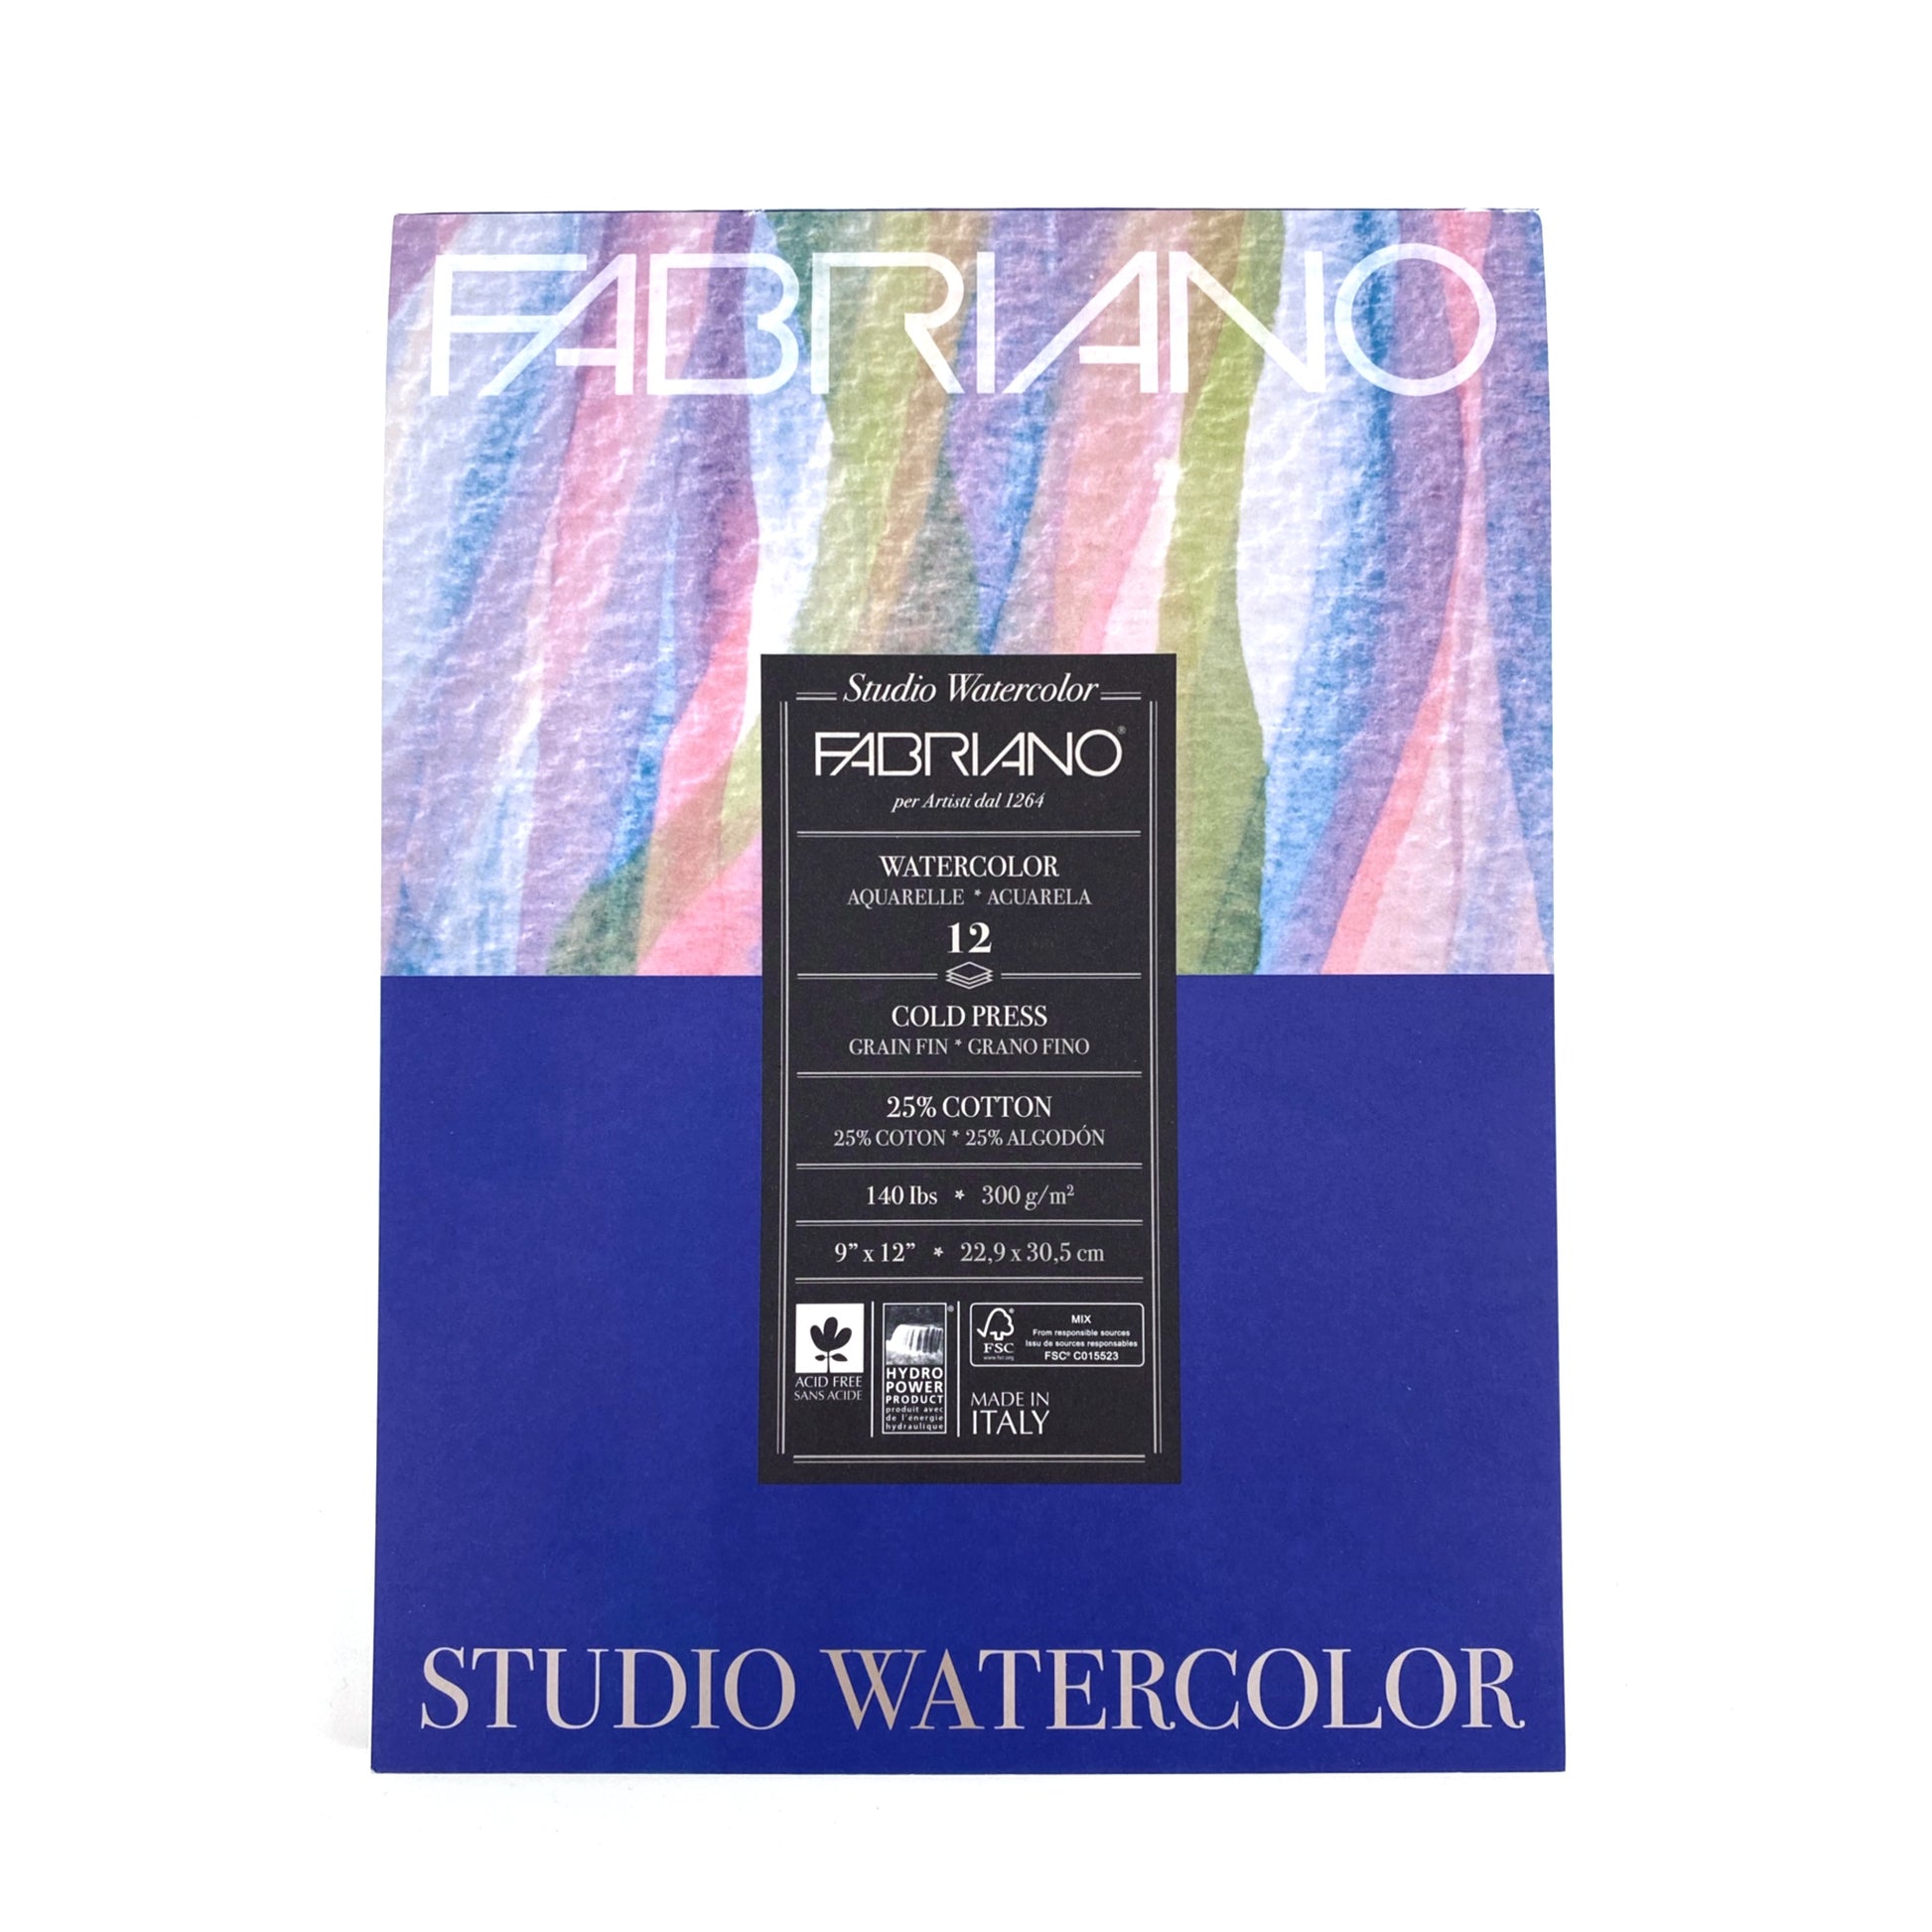 Fabriano Studio Watercolor Pads - 9 x 12 inches - by Fabriano - K. A. Artist Shop